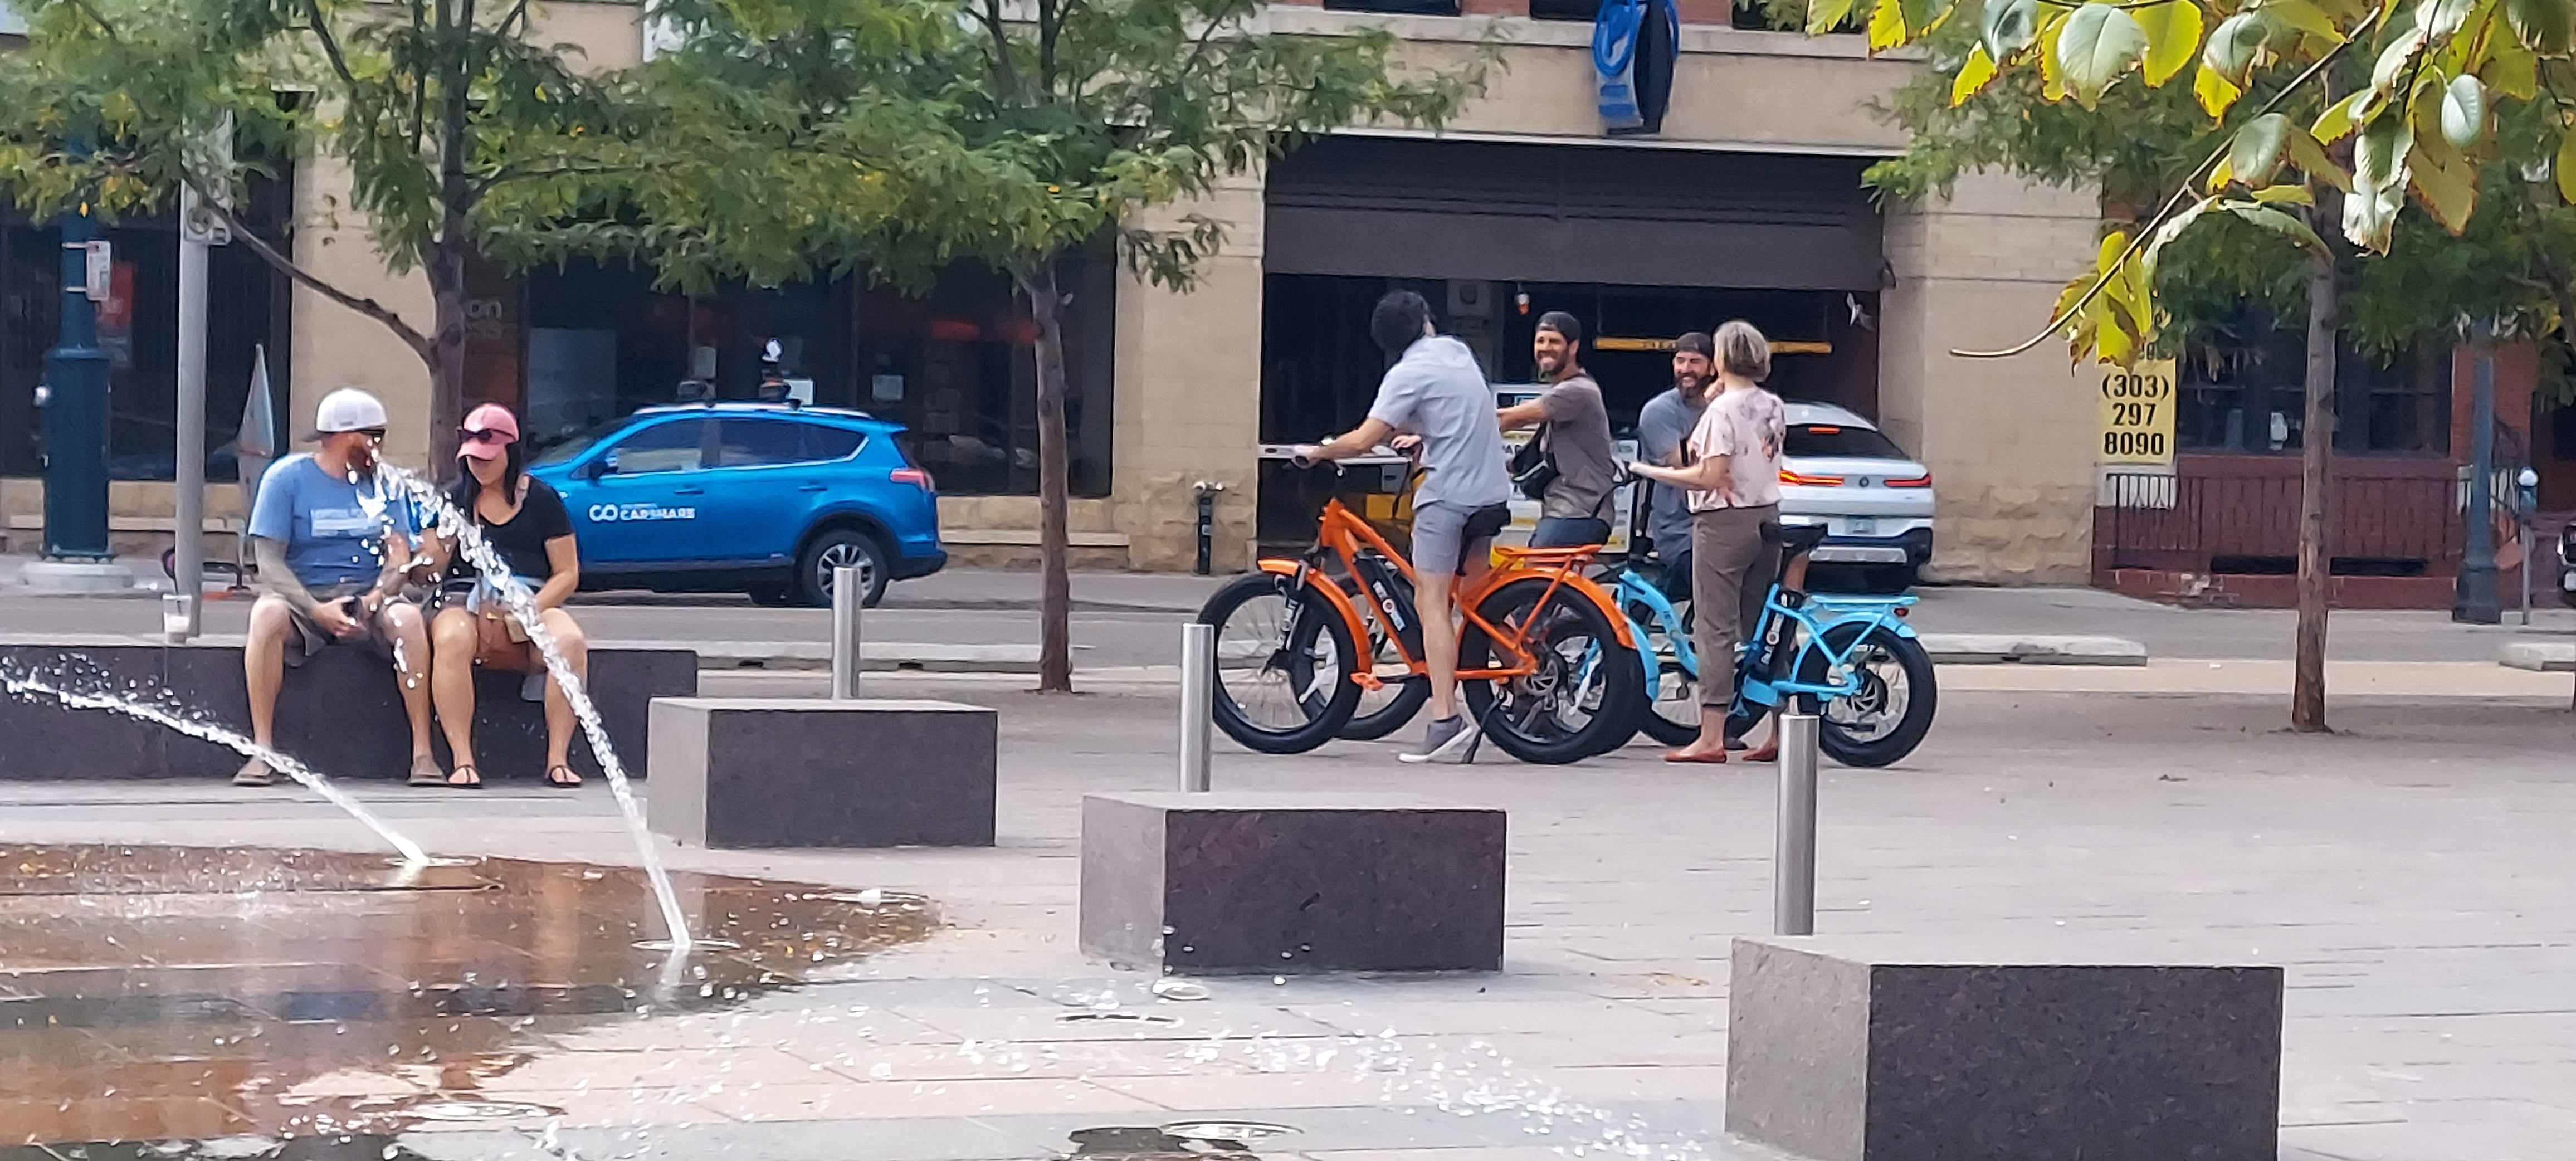 Rebates are available for ebikes in Denver